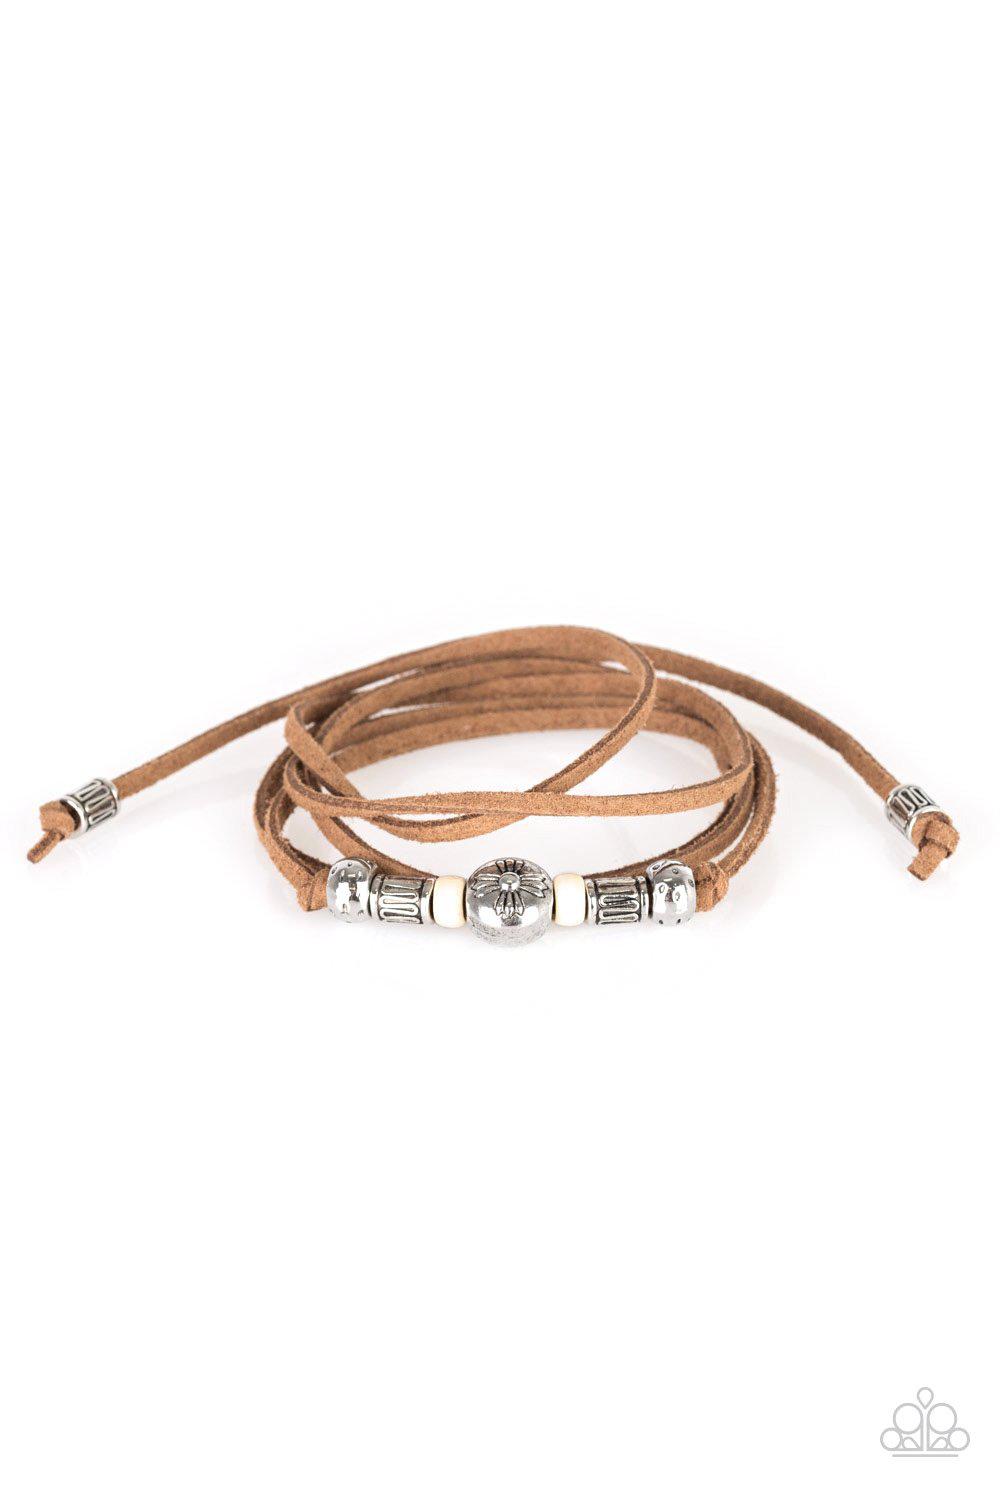 Find Your Way White and Brown Suede Urban Tie Wrap Bracelet - Paparazzi Accessories- lightbox - CarasShop.com - $5 Jewelry by Cara Jewels